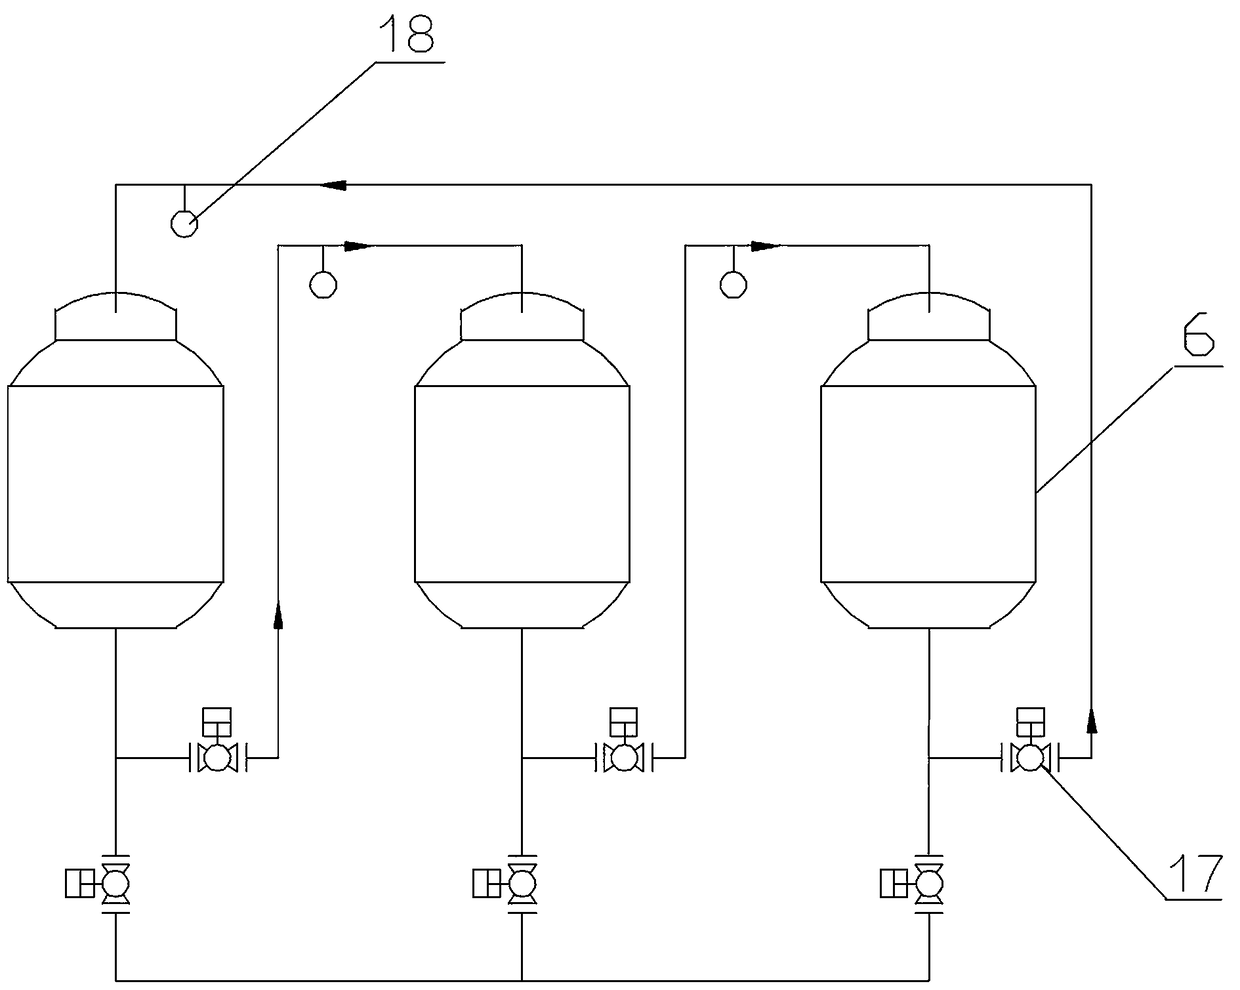 Circulating environment-friendly treatment process and circulating environment-friendly treatment system for waste viscose liquid